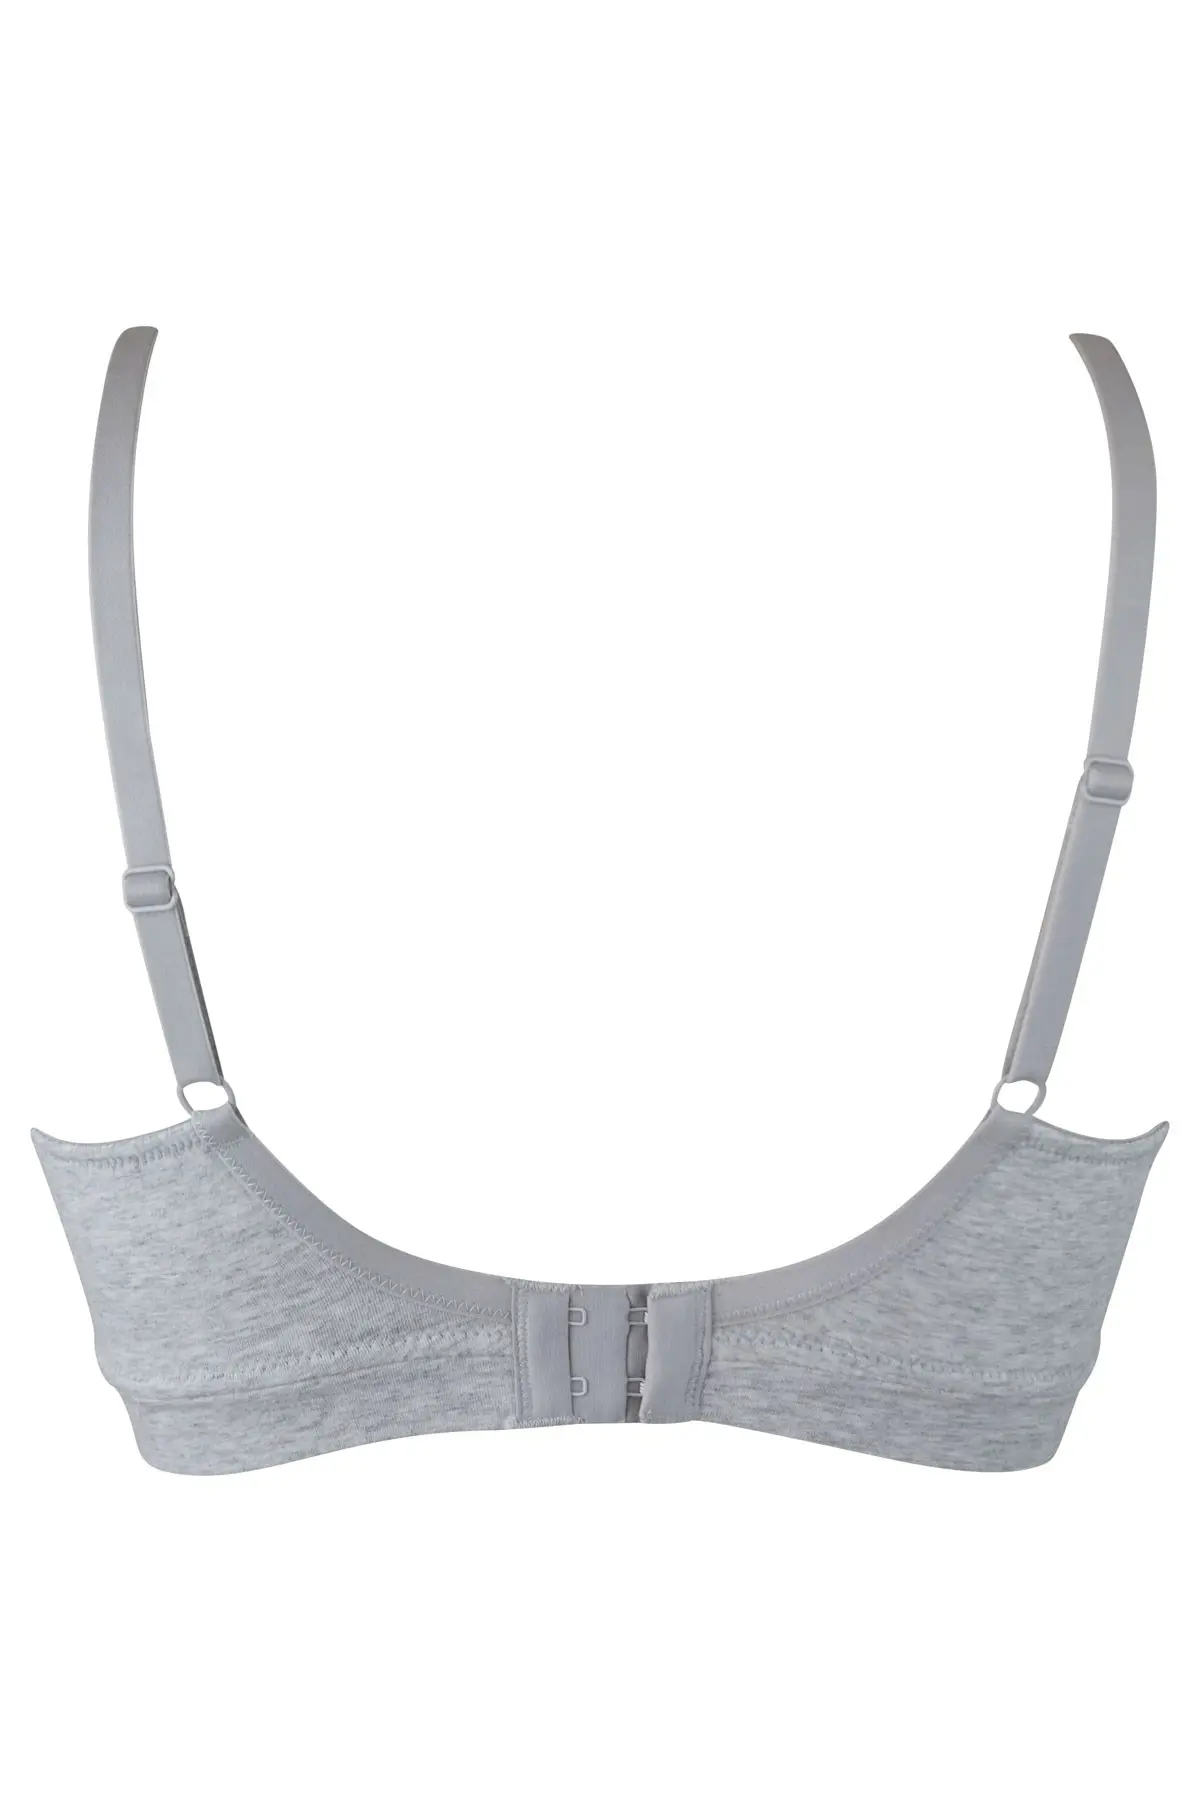 Plain T-Shirt Women Cotton Padded Bra Set at Rs 100/set in Greater